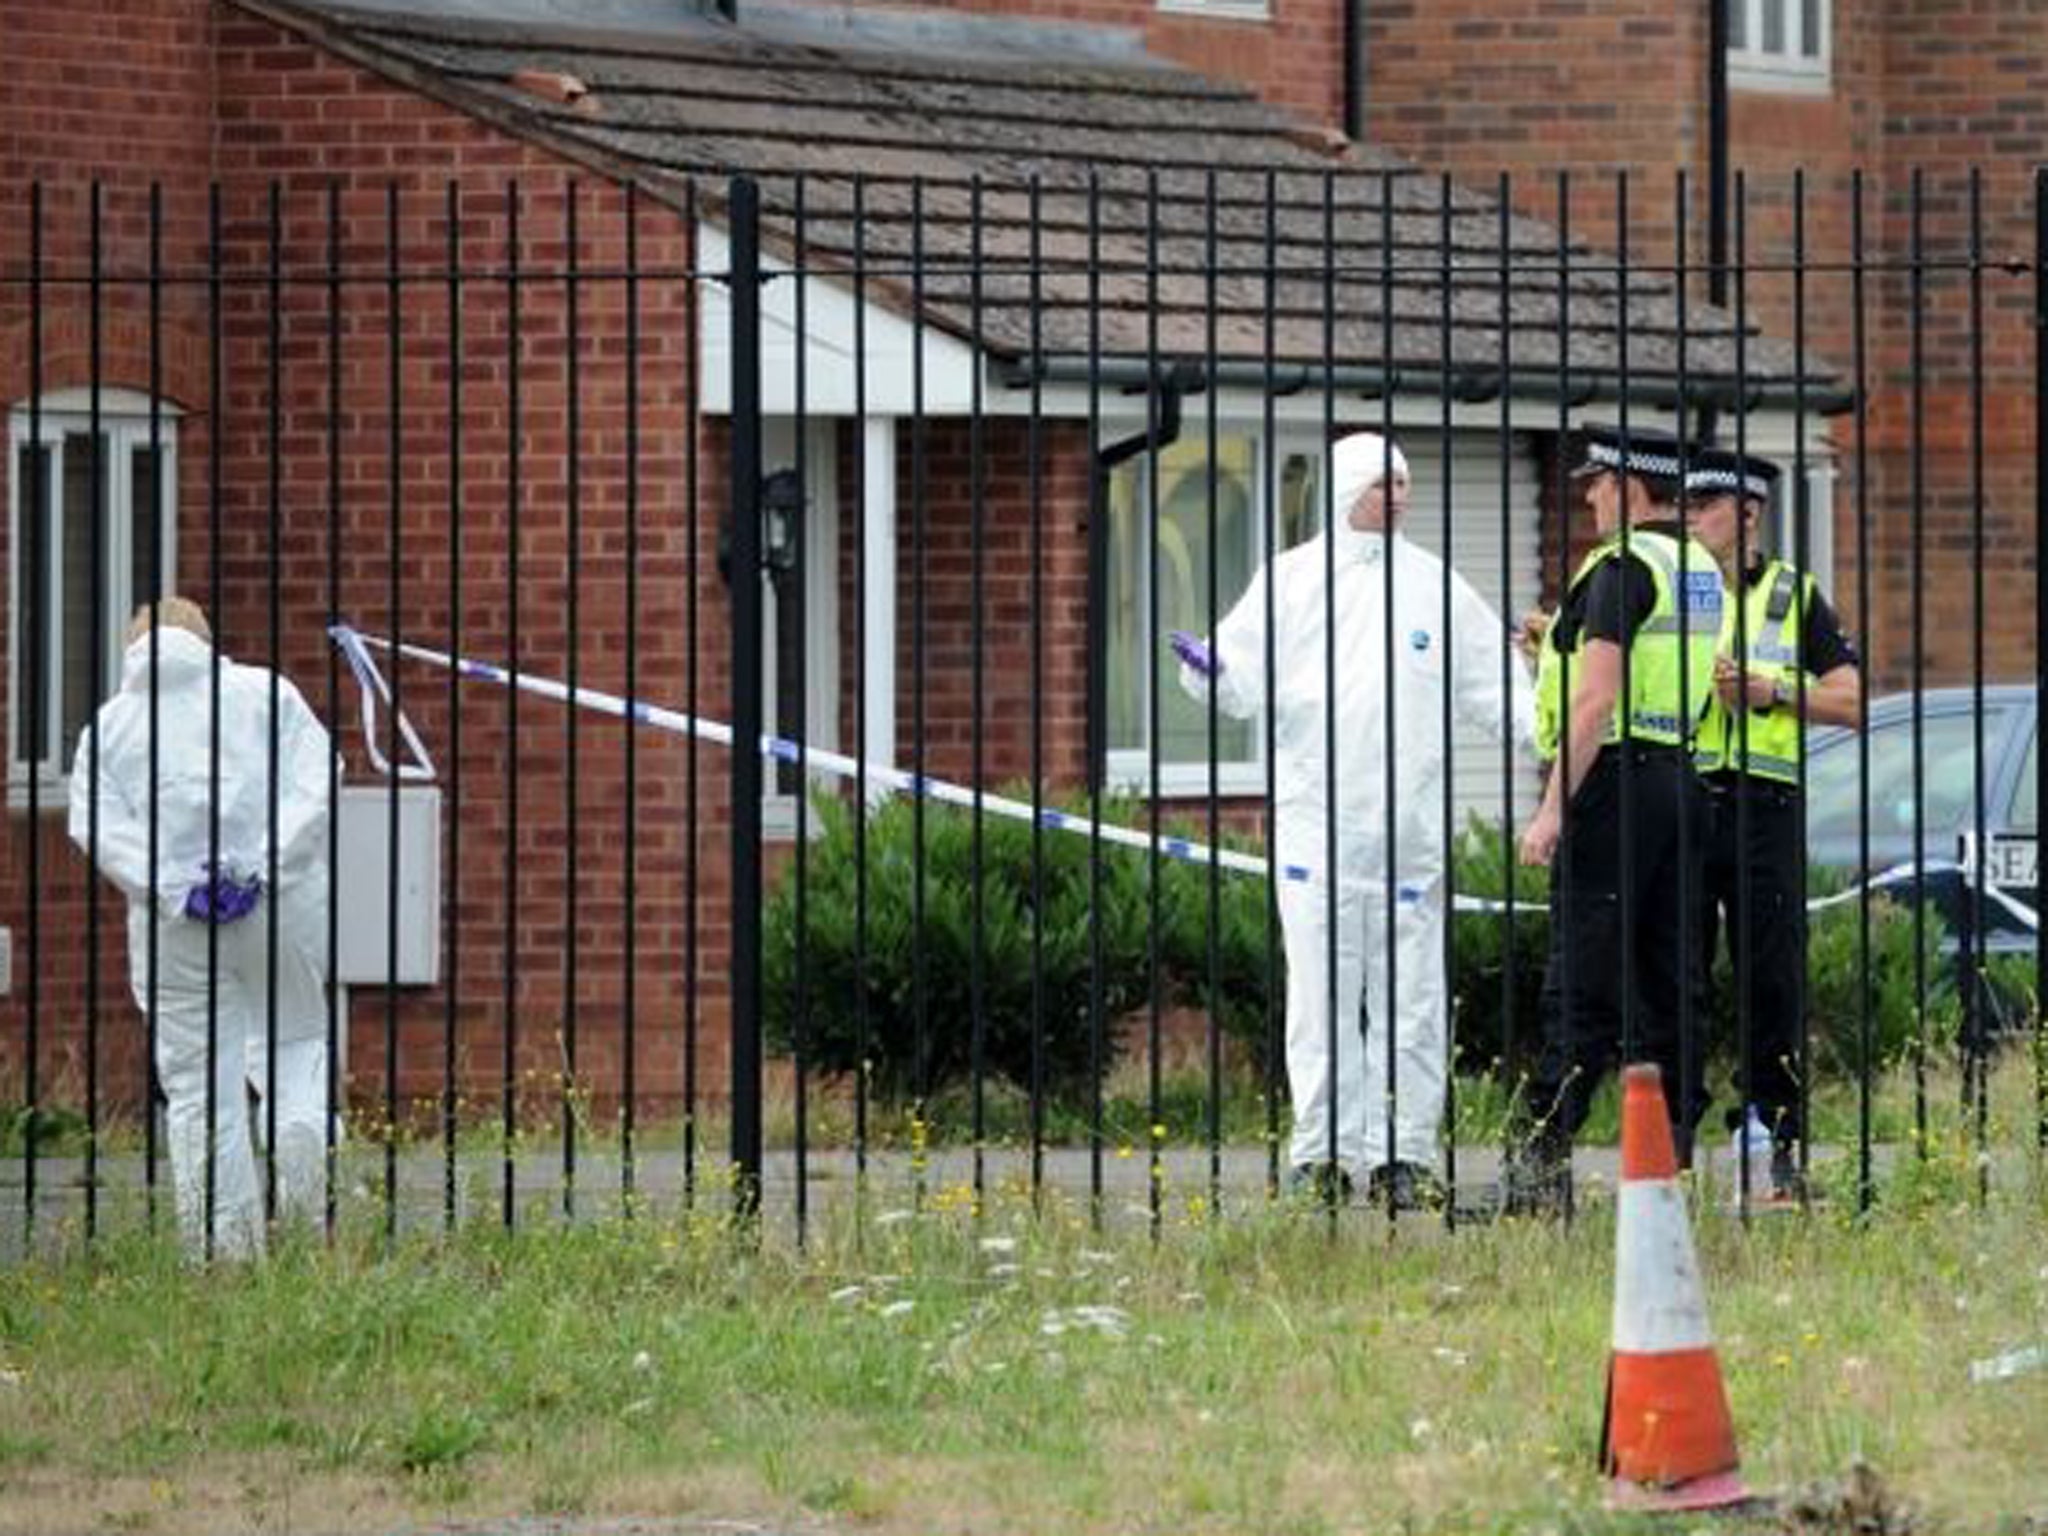 Scenes of Crime Officers at the scene on Willenhall Street, where the incident took place